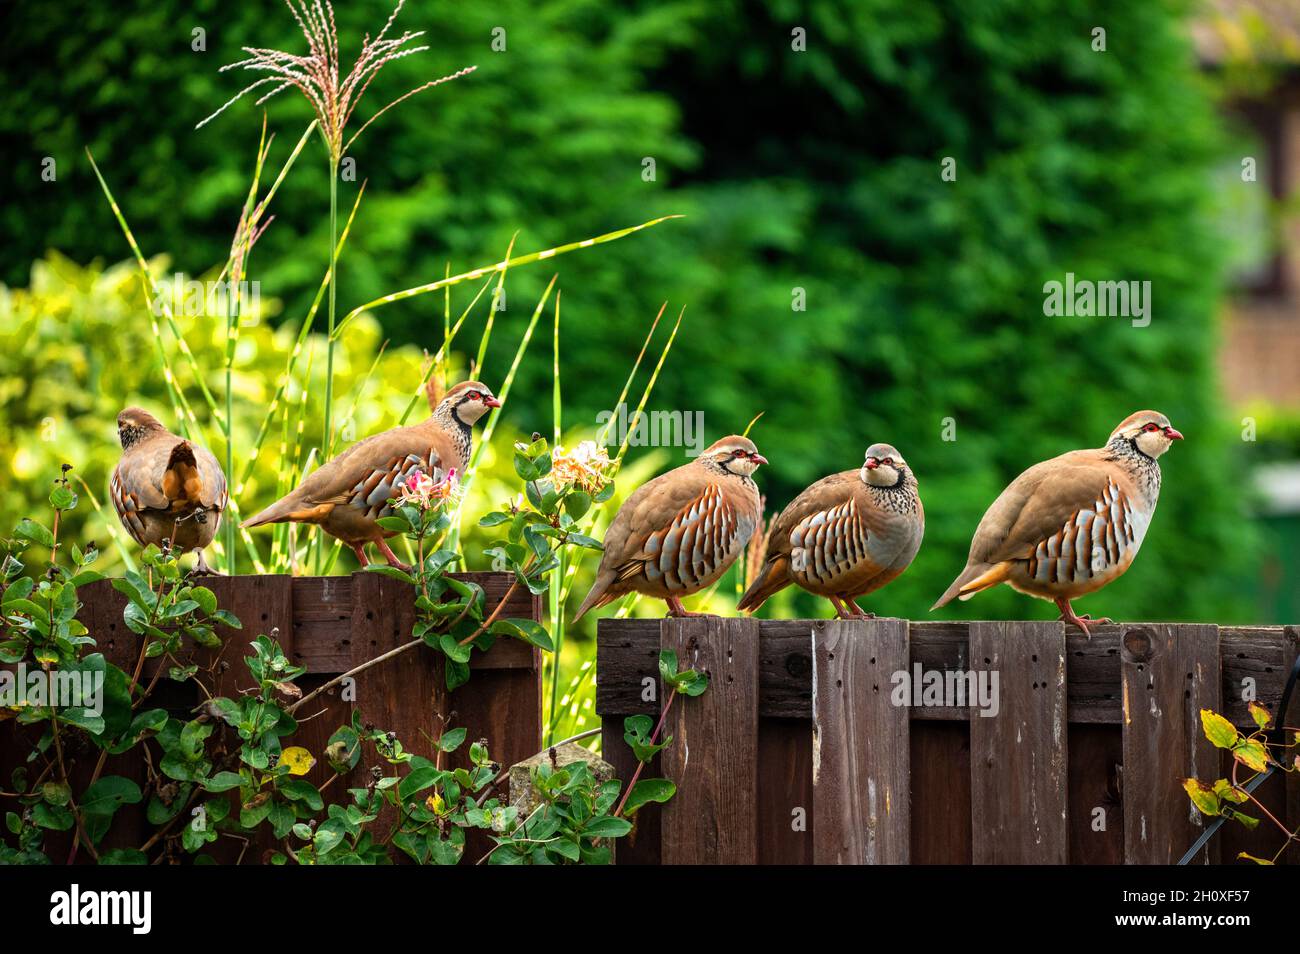 Red Legged Partridge in a garden setting Stock Photo